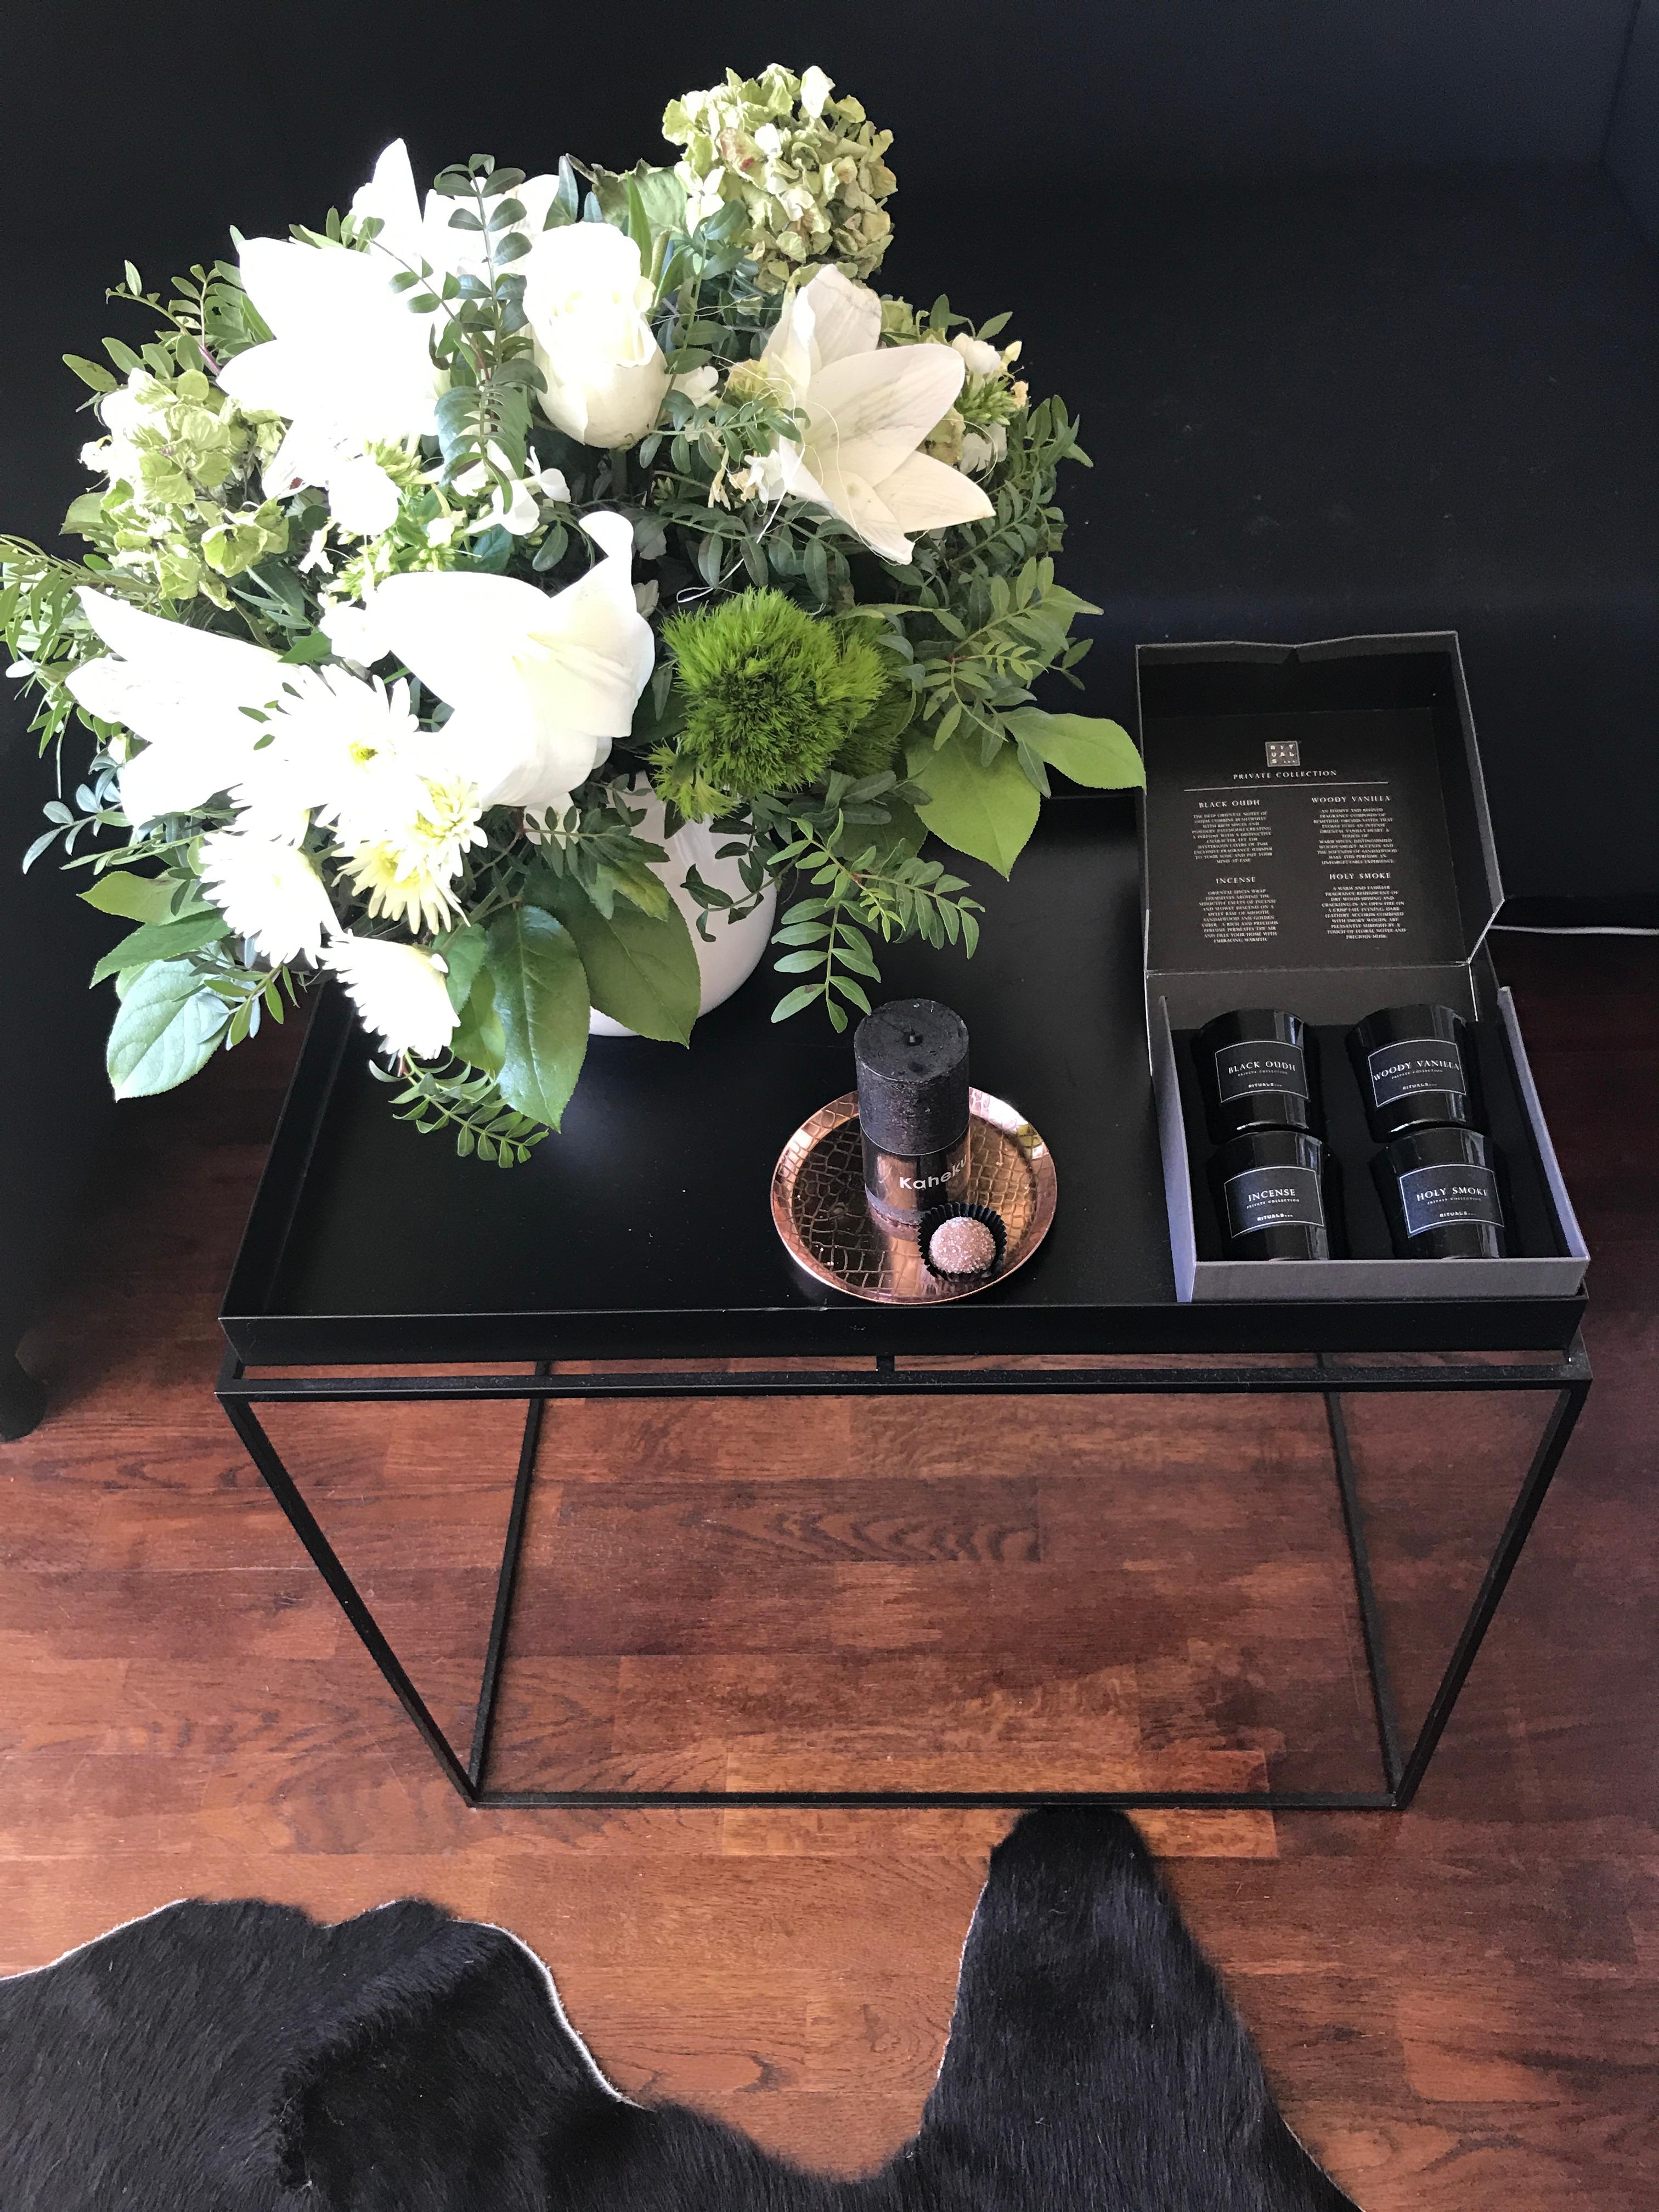 I love my black coffeetable with flowers & candles 🖤 #scandistyle #livingroom #coffeetable #flowers #copper #rituals 